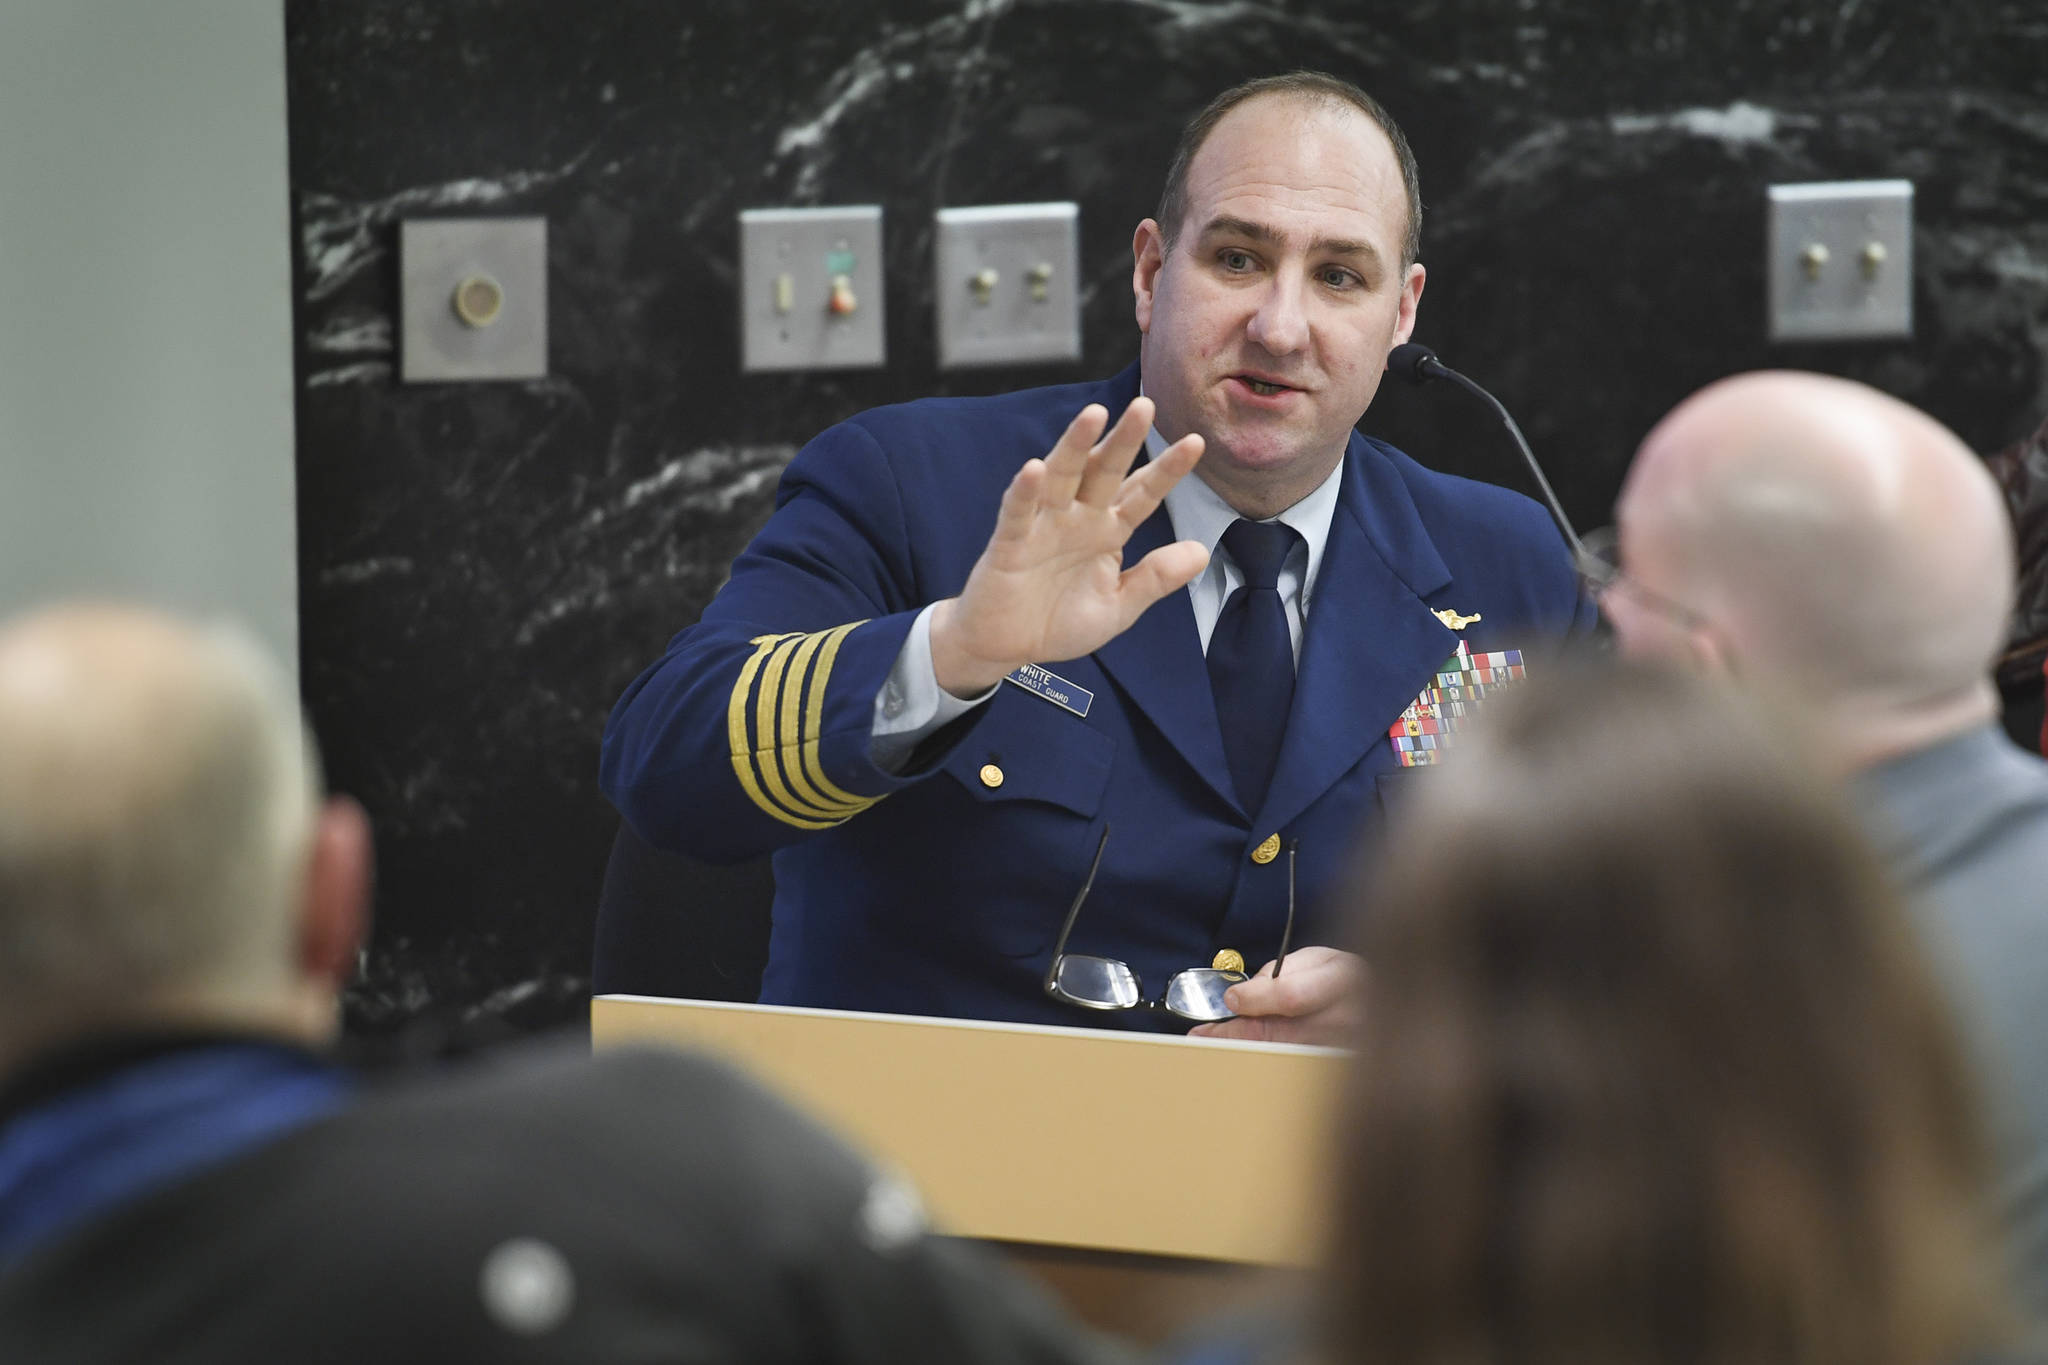 Capt. Steve White, from U.S. Coast Guard Sector Juneau, gives a presentation to the Visitor Industry Task Force in the Assembly chambers on Tuesday, Jan. 7, 2020. (Michael Penn | Juneau Empire)